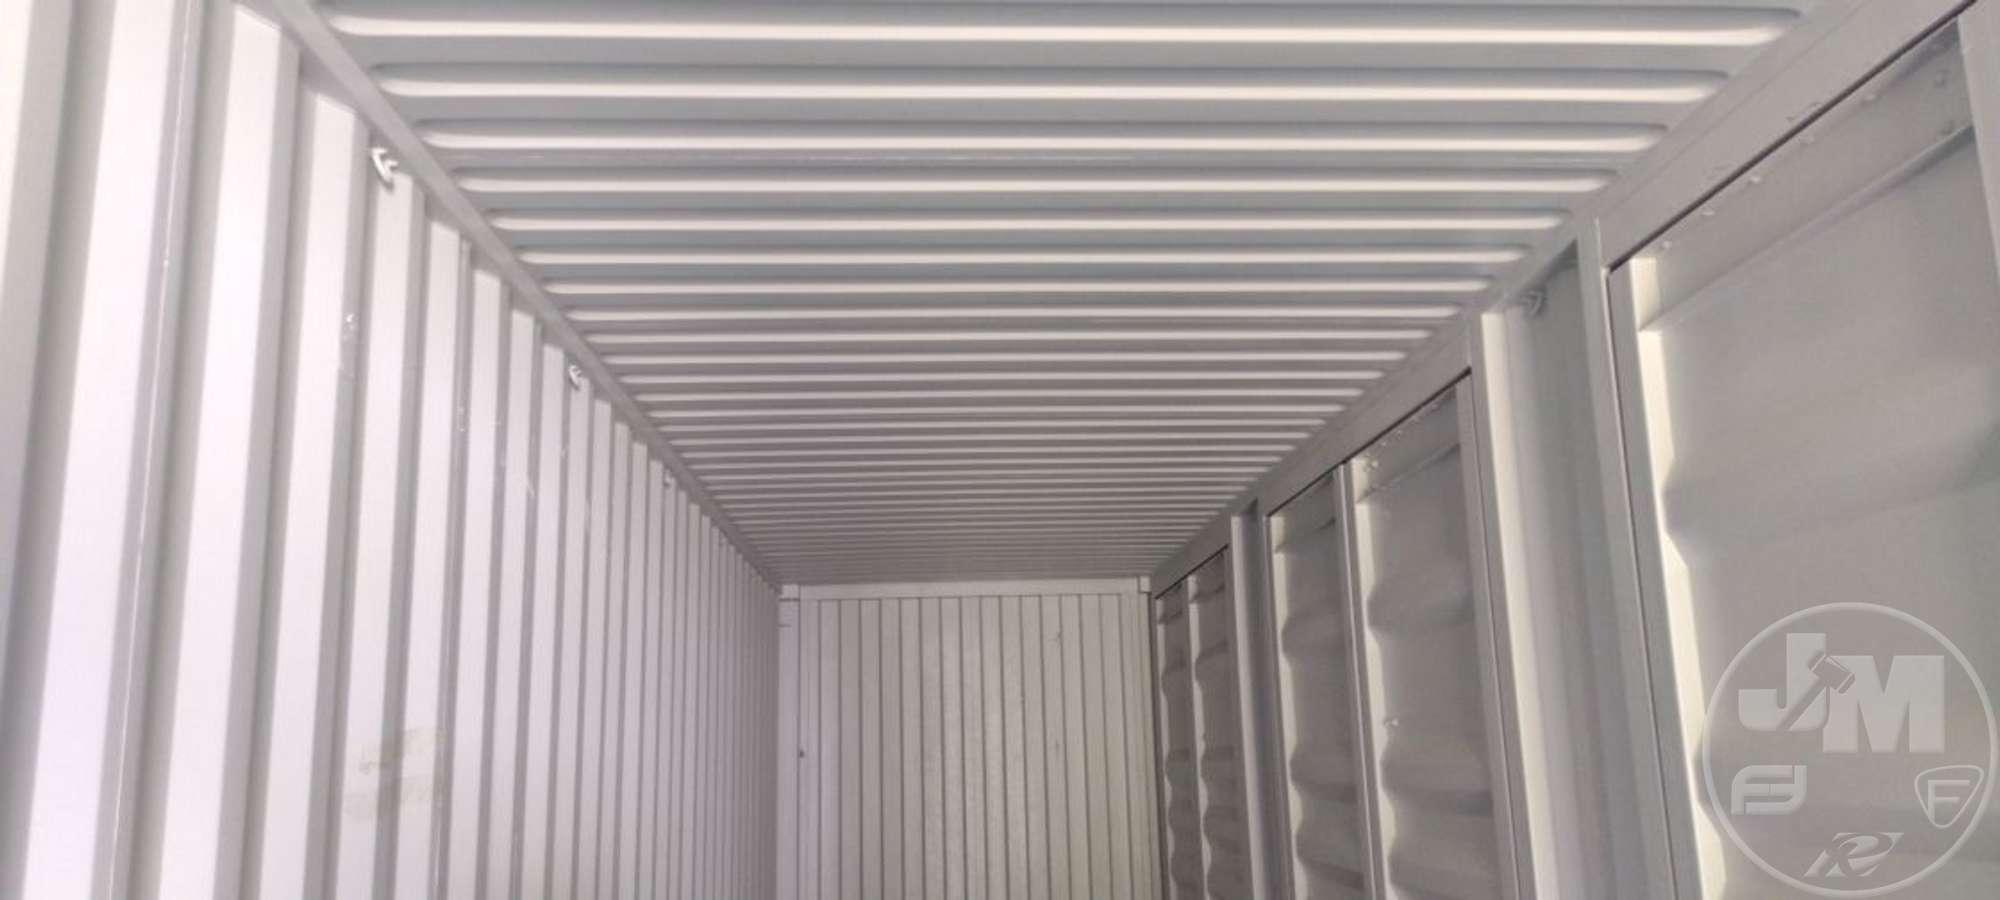 2024 40' CONTAINER SN: LYPU0148131